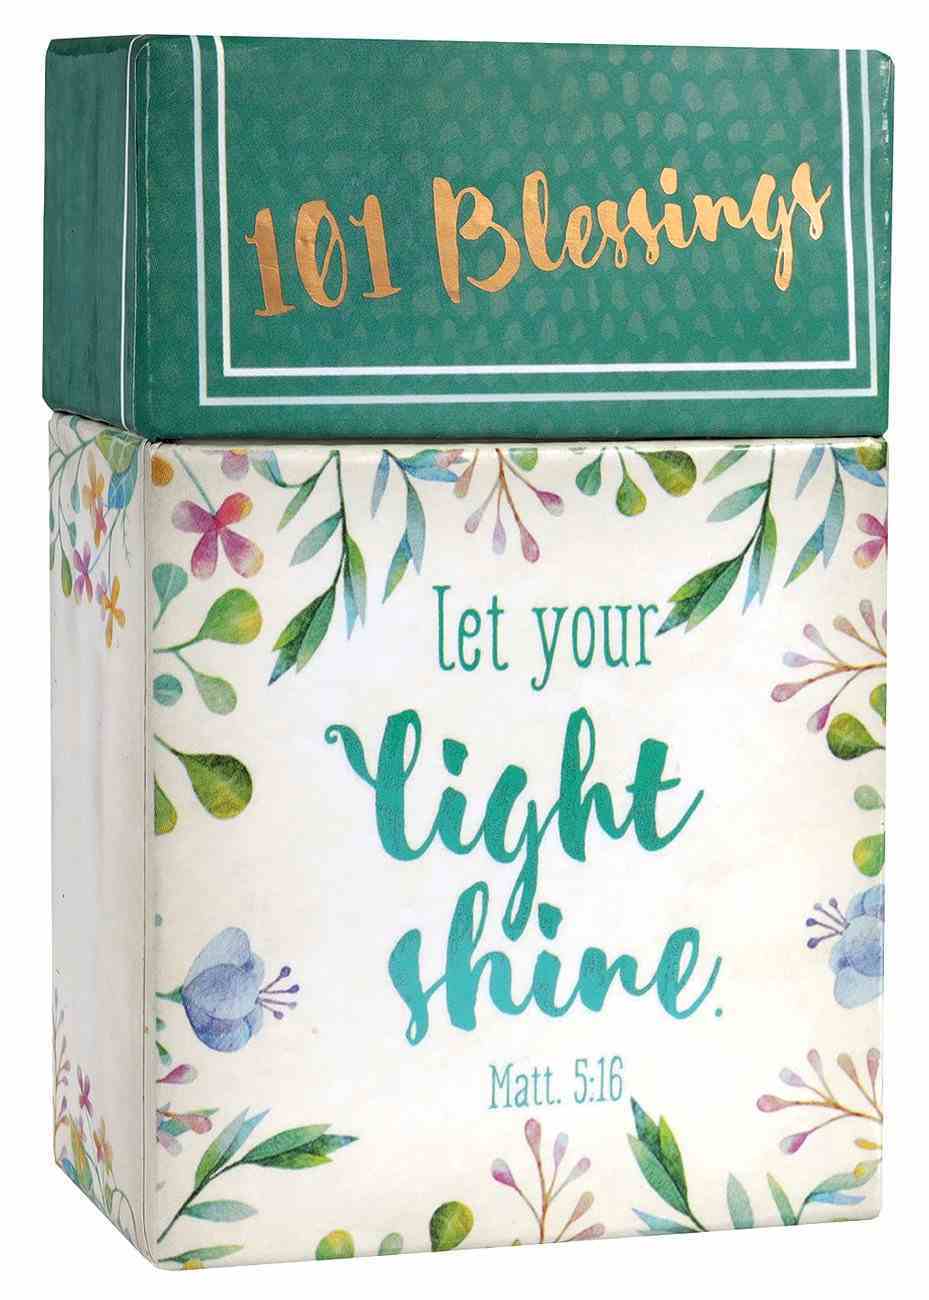 Box of Blessings: 101 Blessings Let Your Light Shine, Floral Box